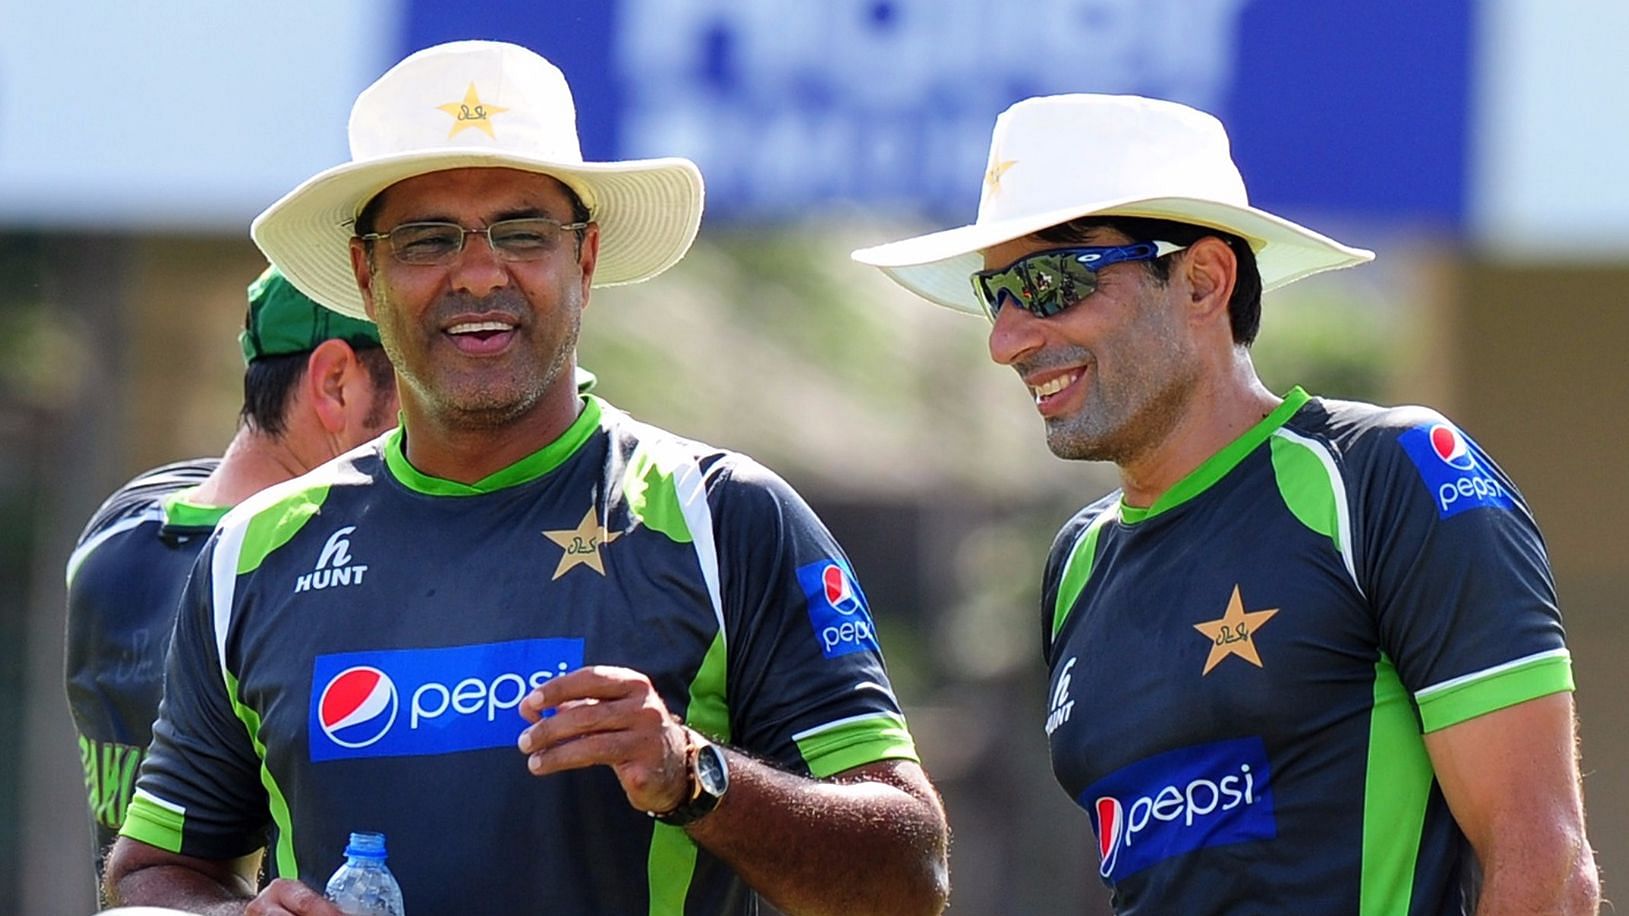 Waqar Younis has been named Pakistan’s bowling coach while Misbah-Ul-Haq will be head coach and chief selector for the next three years.